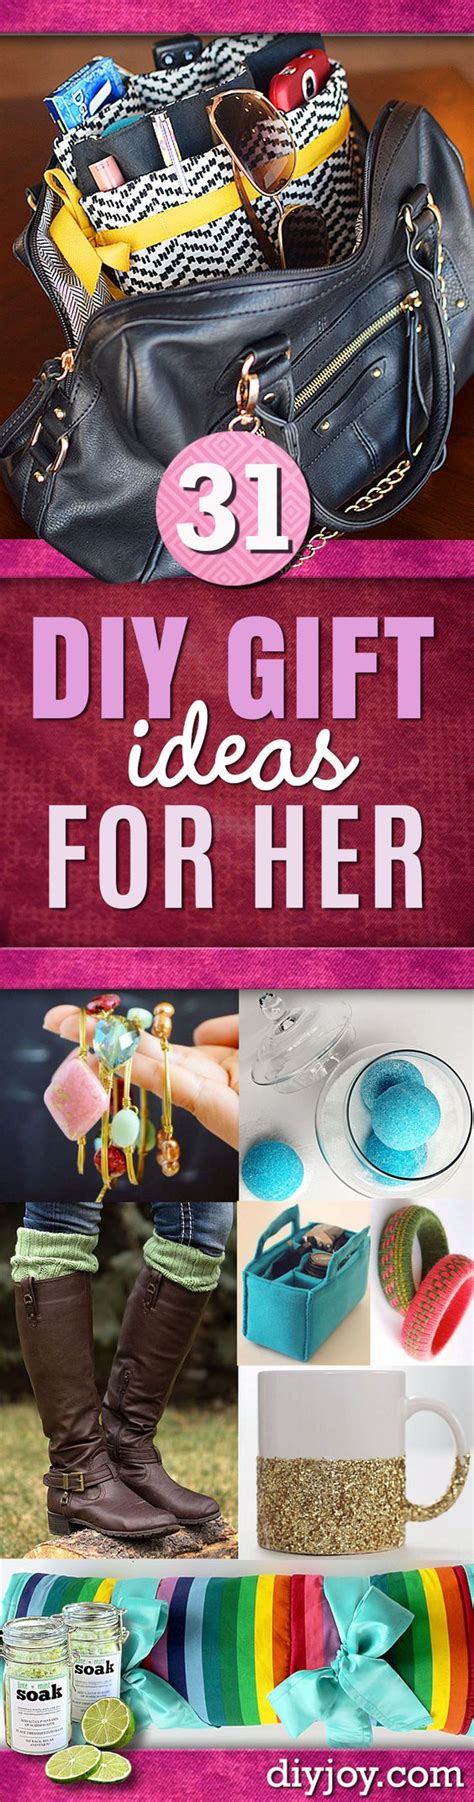 A personalized present will show how much you appreciate her. Super Special DIY Gift Ideas for Her | Homemade ...